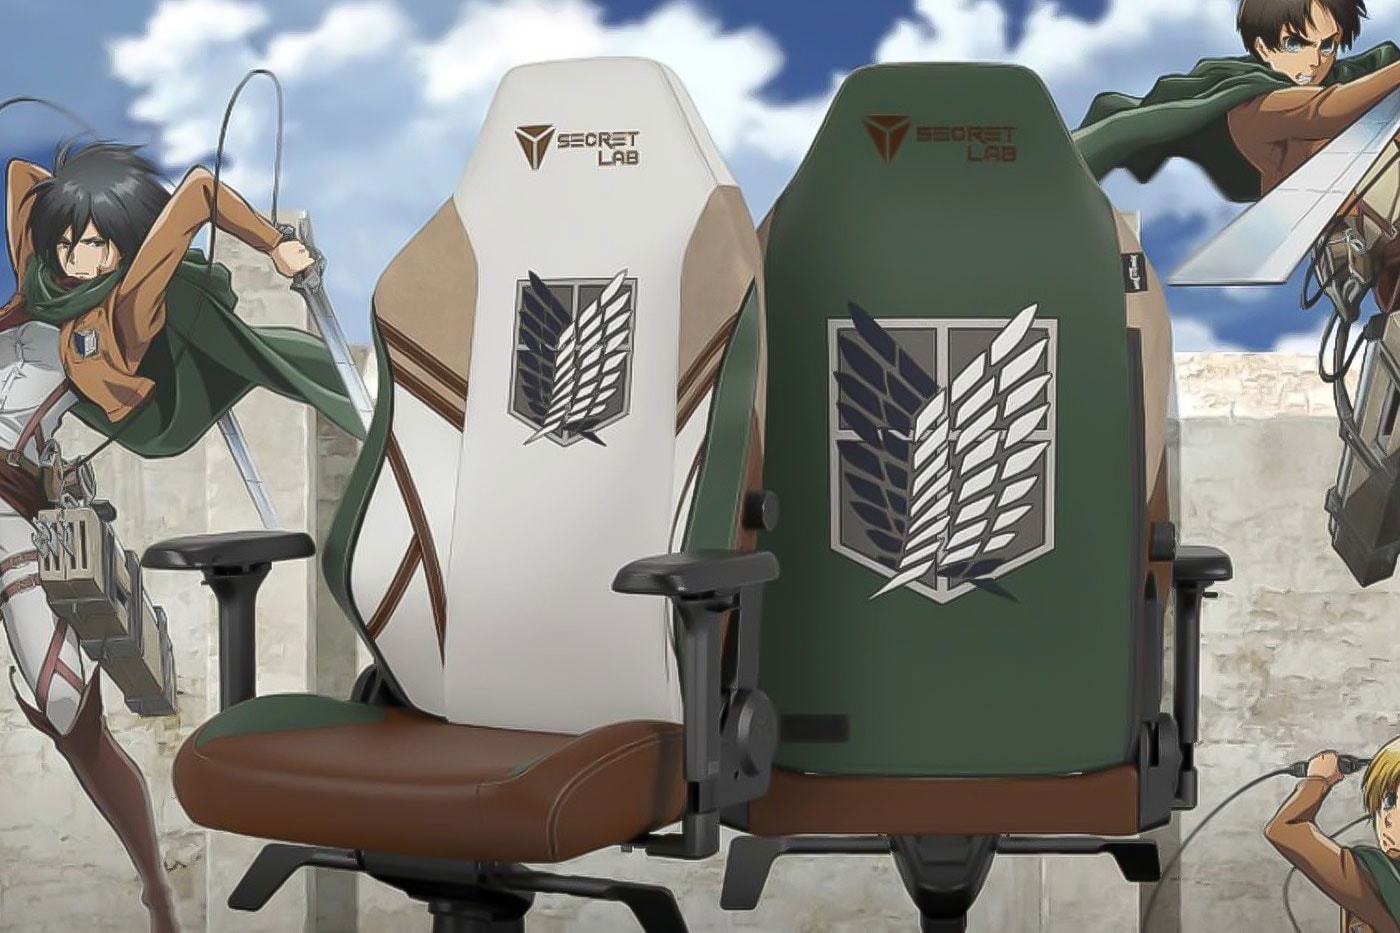 Secretlab Releases 'Attack on Titan' Gaming Chair